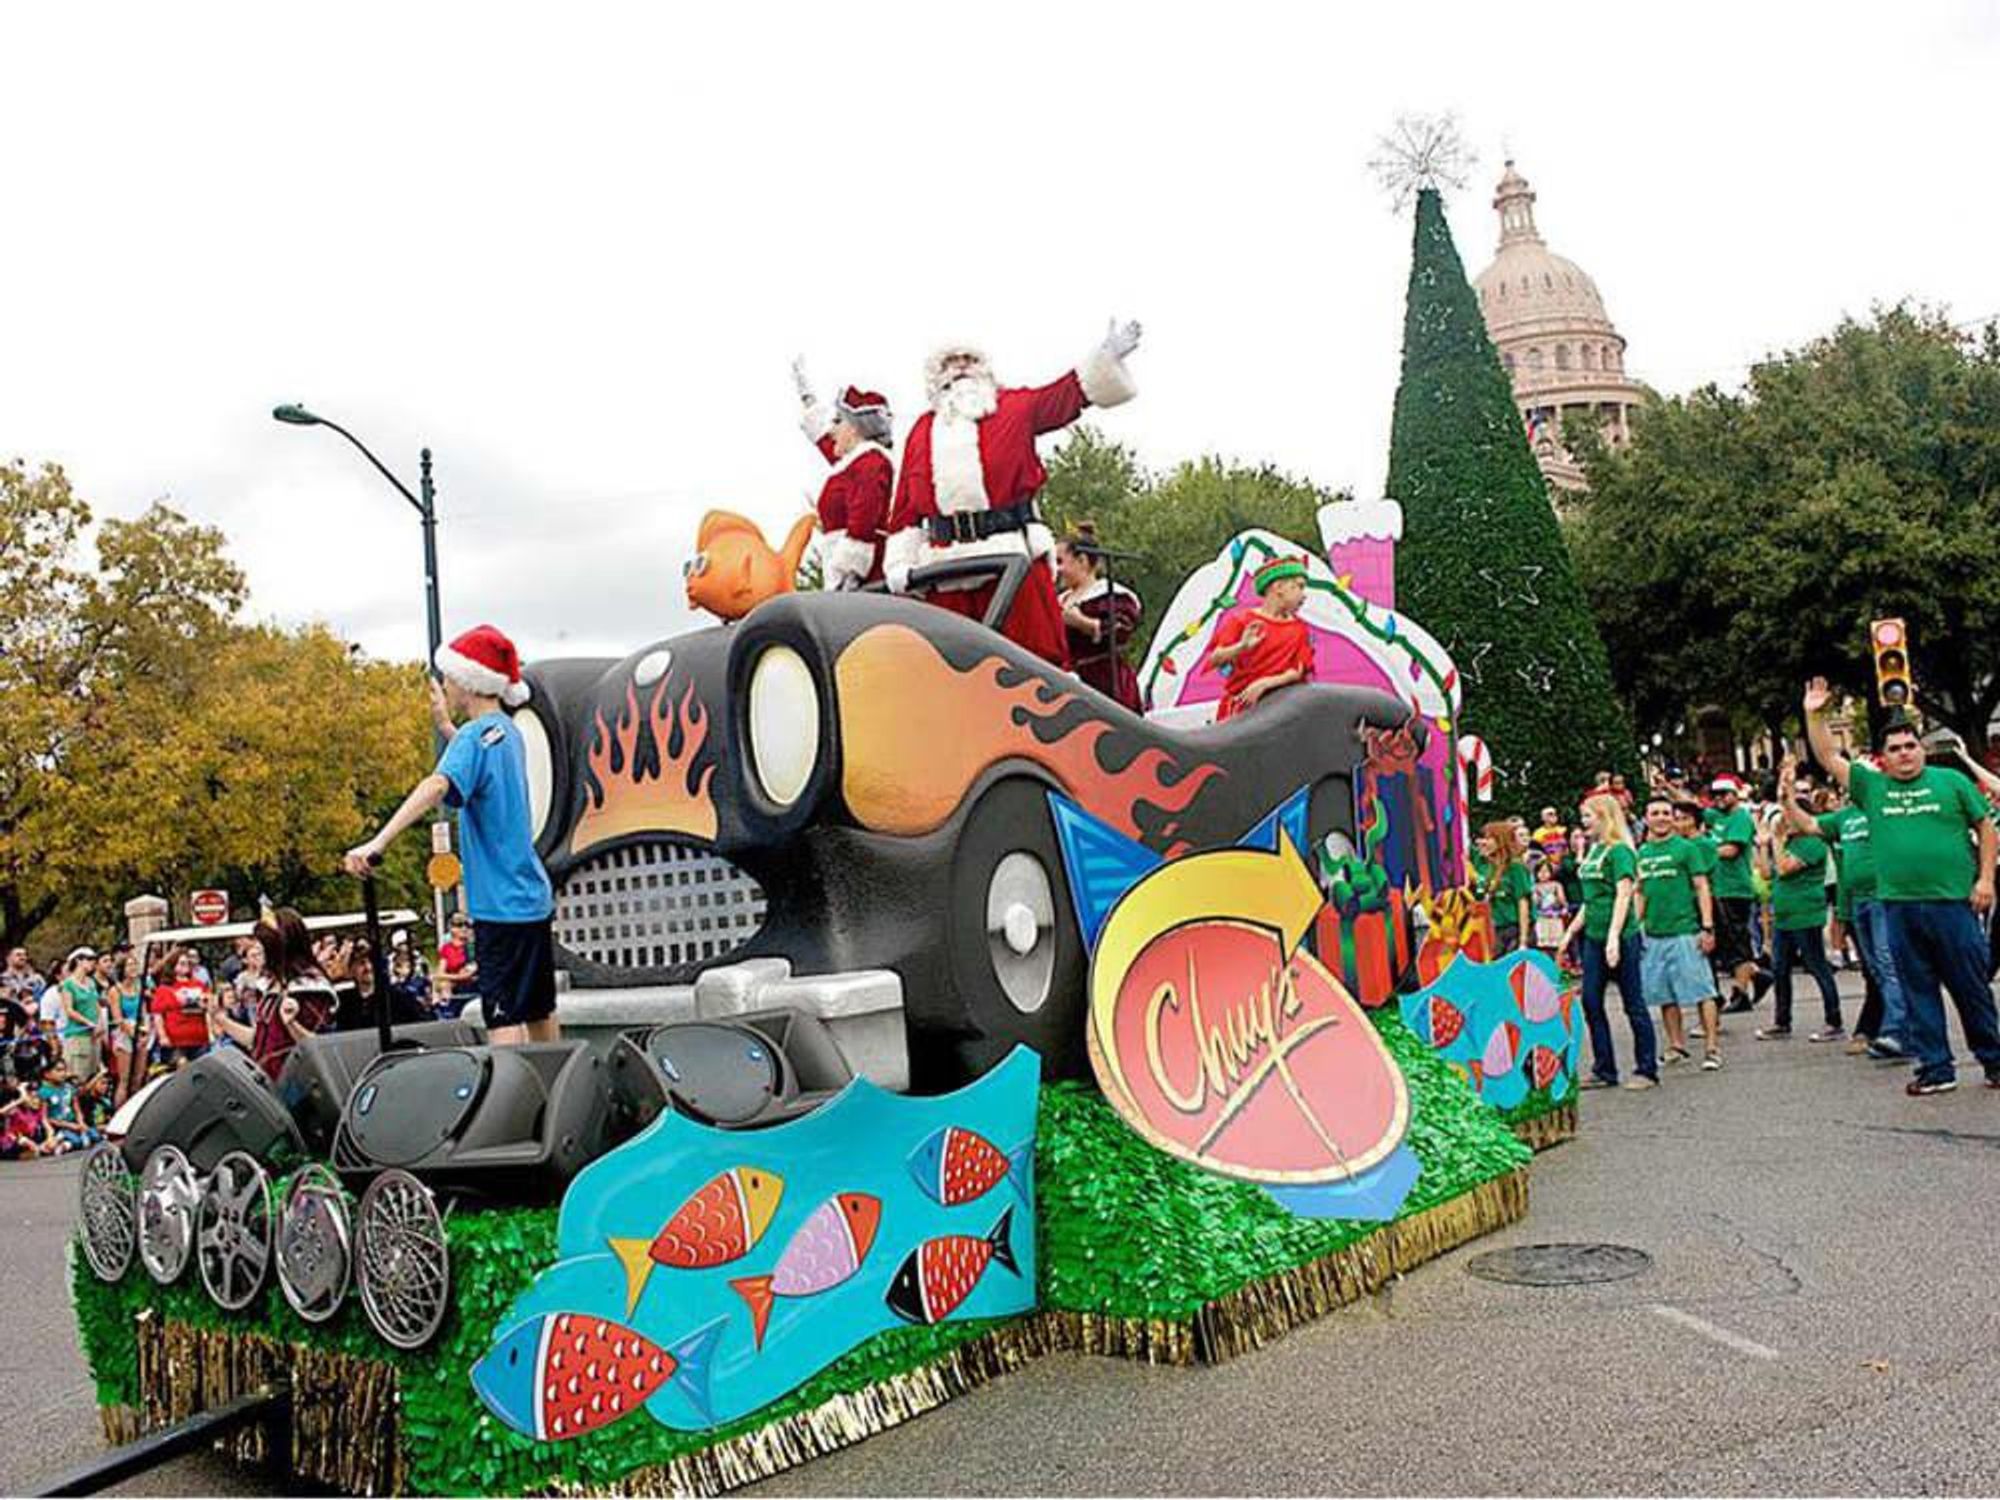 parade float from Chuy's Children Giving to Children Christmas parade